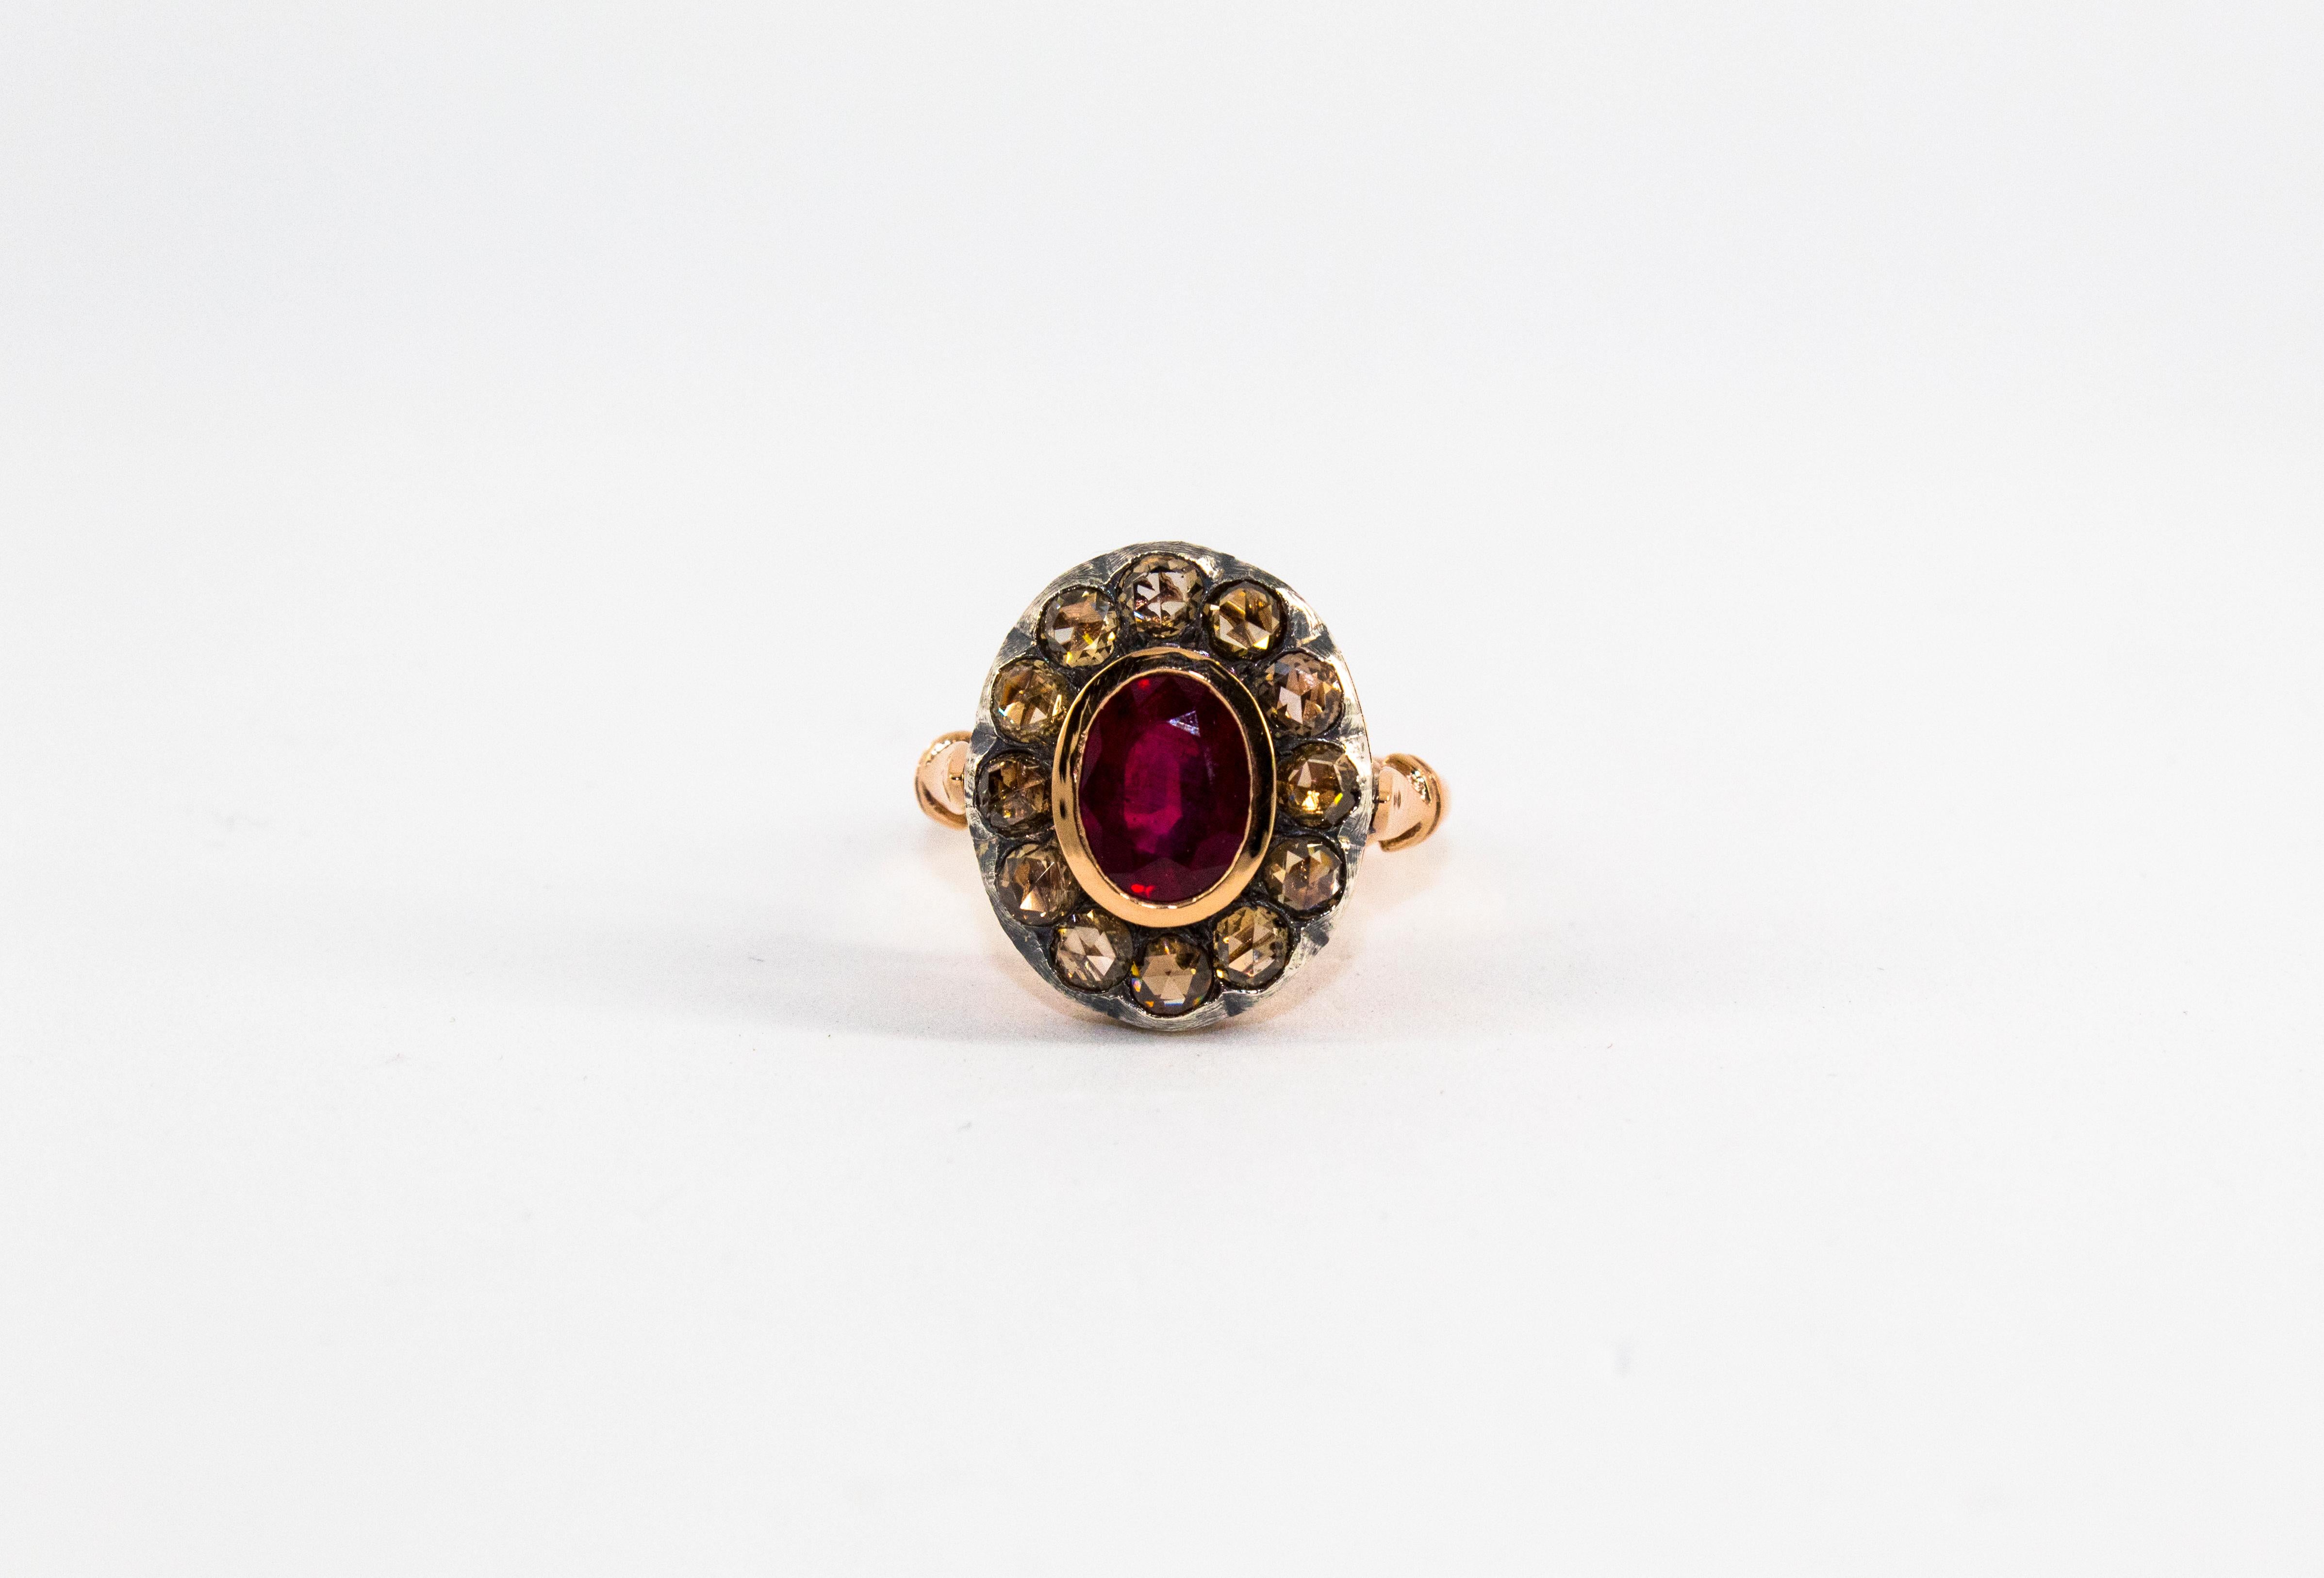 This Ring is inspired by Renaissance Style.
This Ring is made of 9K Yellow Gold and Sterling Silver.
This Ring has 1.15 Carats of White Diamonds.
This Ring has a 1.70 Carats Ruby.
Size ITA: 16 USA: 7.5
We're a workshop so every piece is handmade,